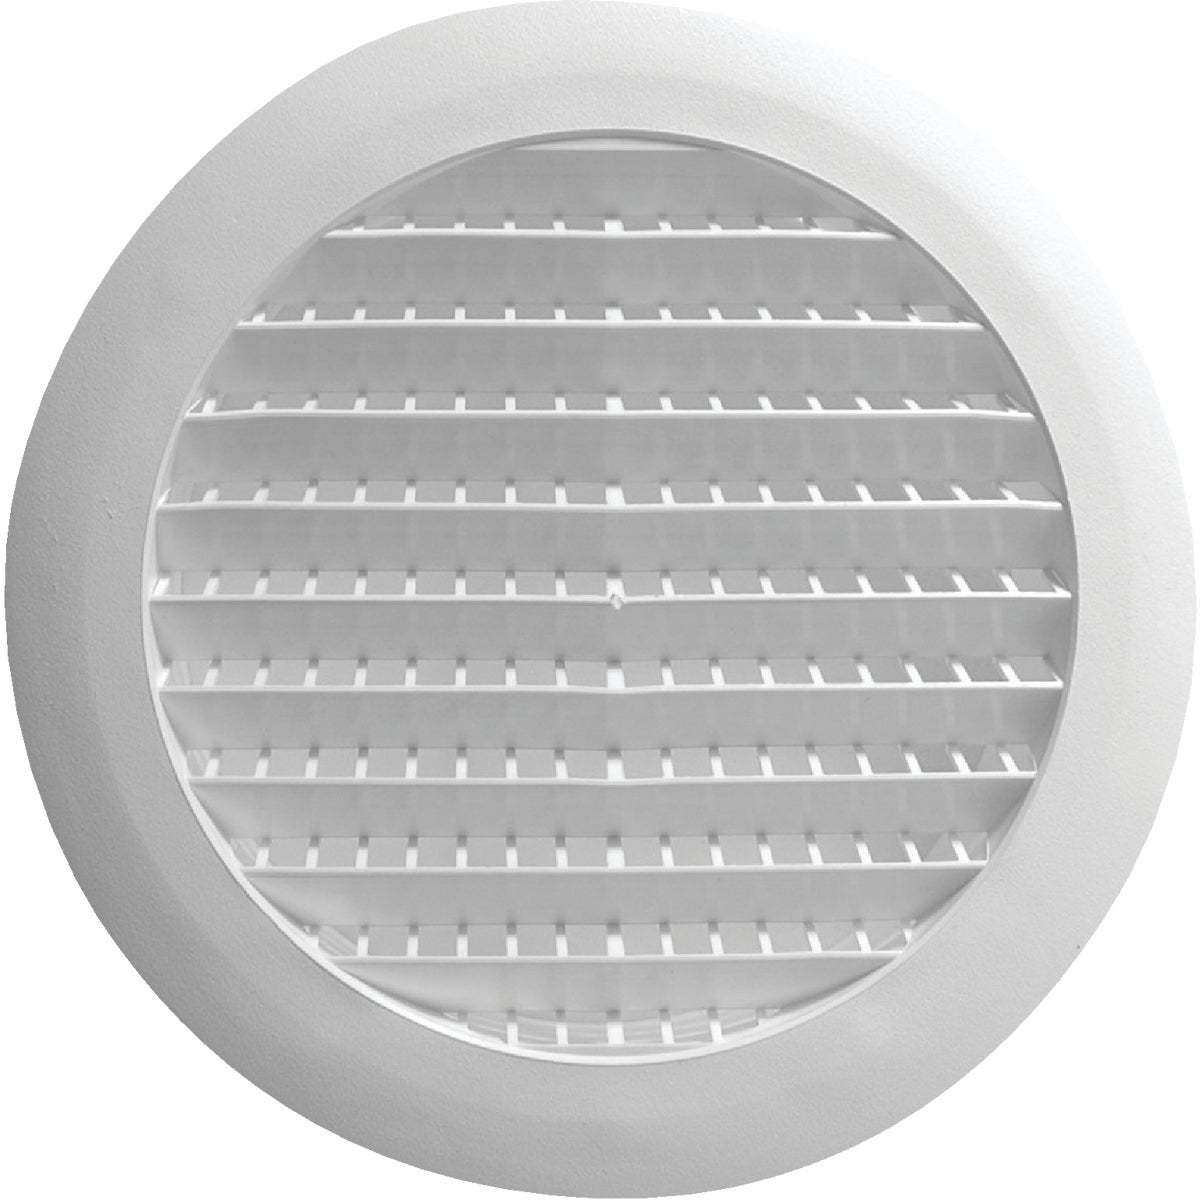 Builders Best 6 In. White Plastic Round Eave & Soffit Vent